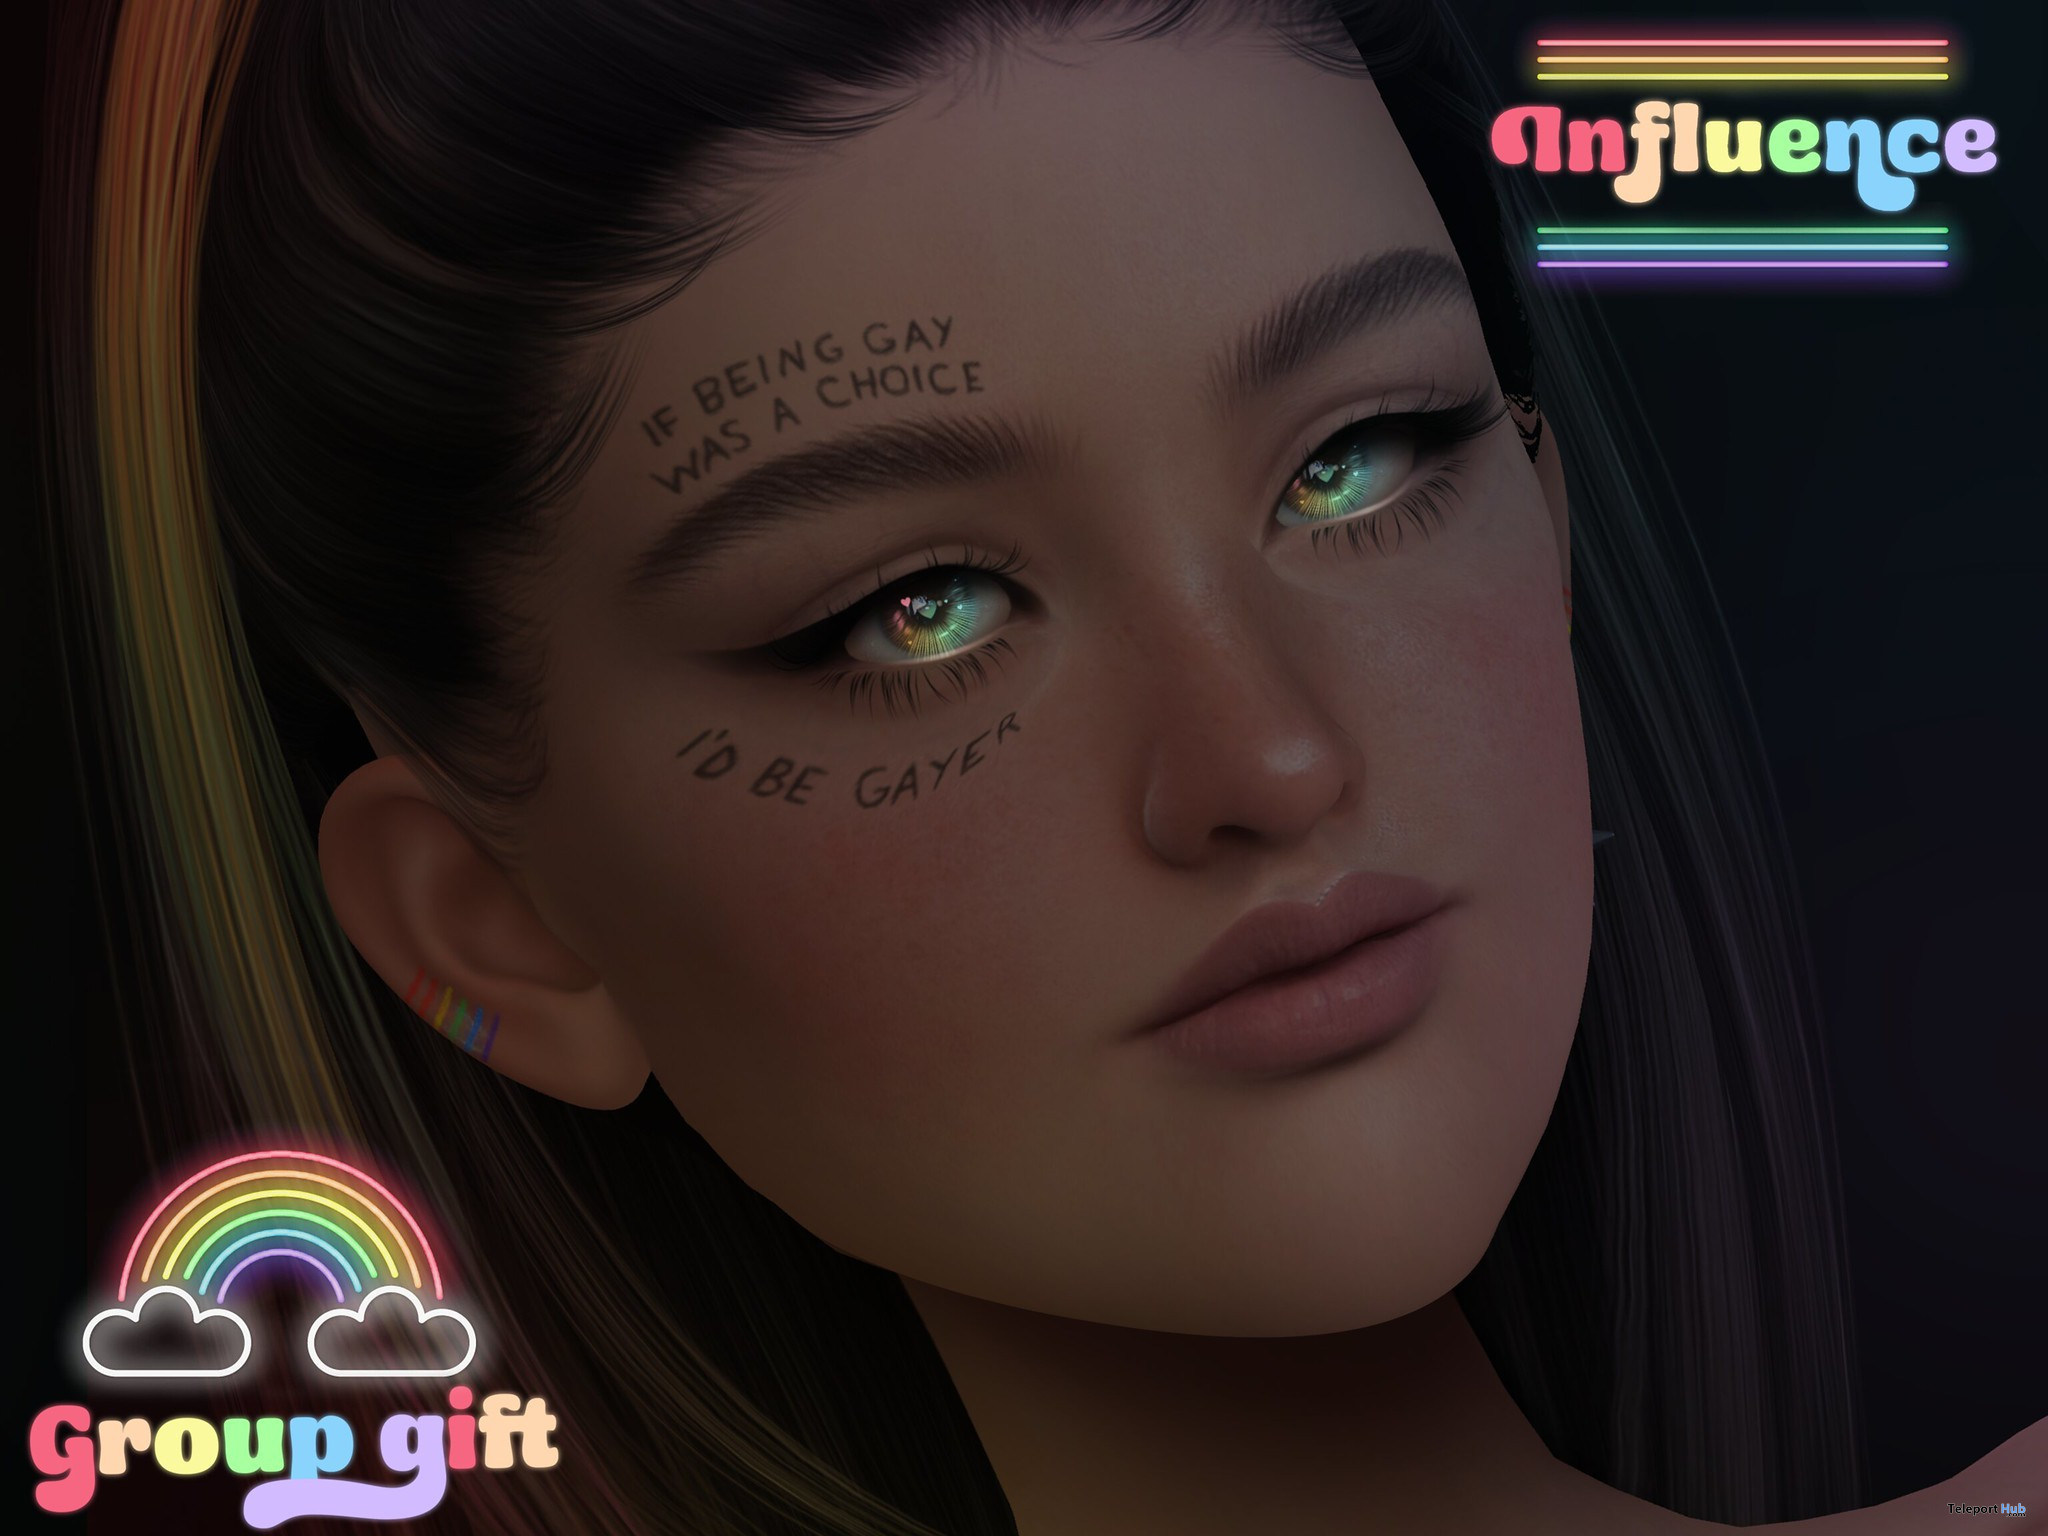 Eyes Overlay, Ears, & Face Tattoos June 2023 Group Gift by INFLUENCE - Teleport Hub - teleporthub.com